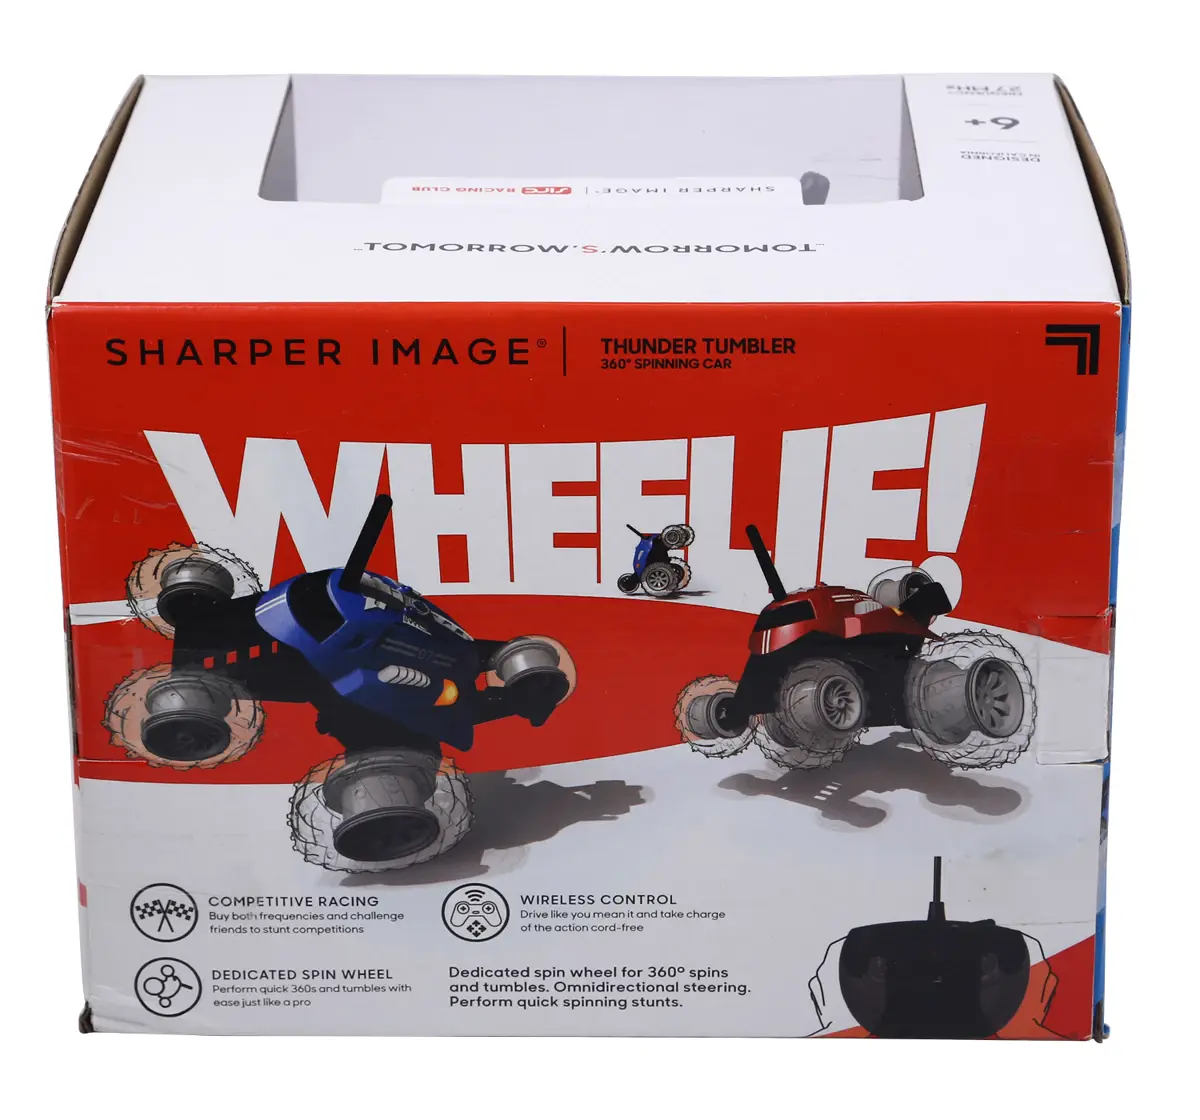 Thunder Tumbler Spinning Stunt Remote Controlled Car by Sharper Image, For Kids 6 Years and Above, Blue